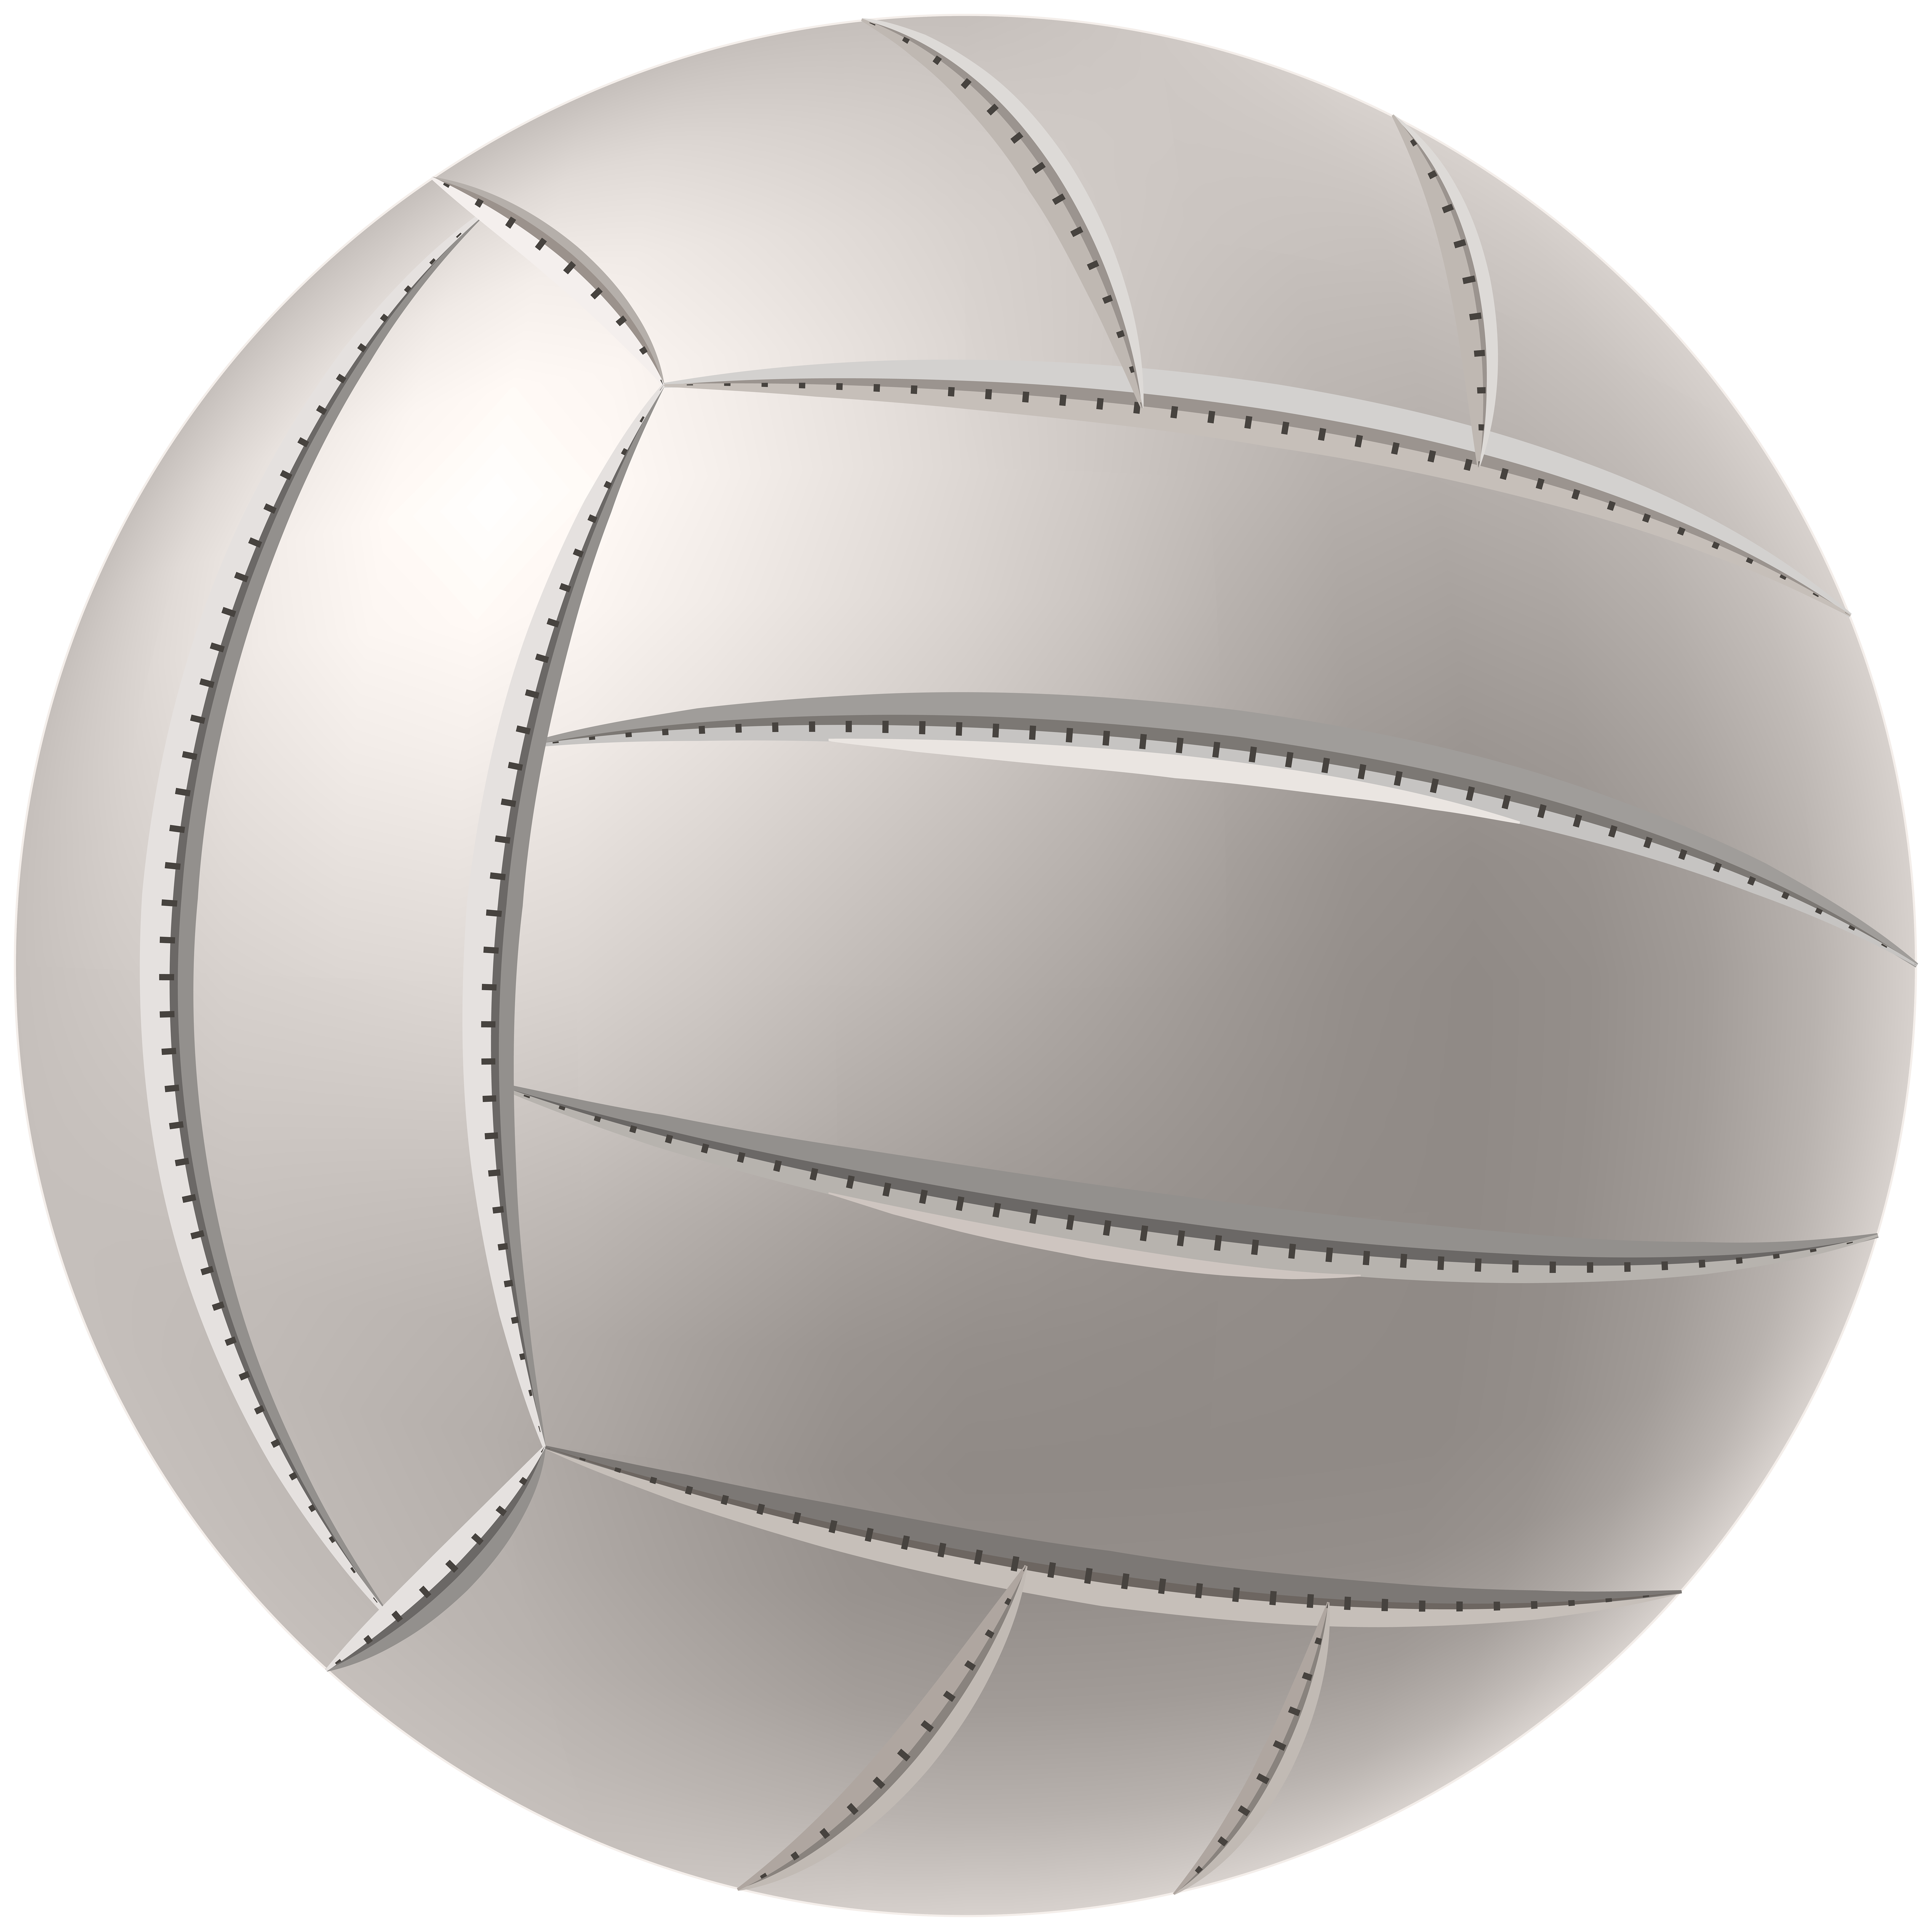 Volleyball PNG Clip Art Image​